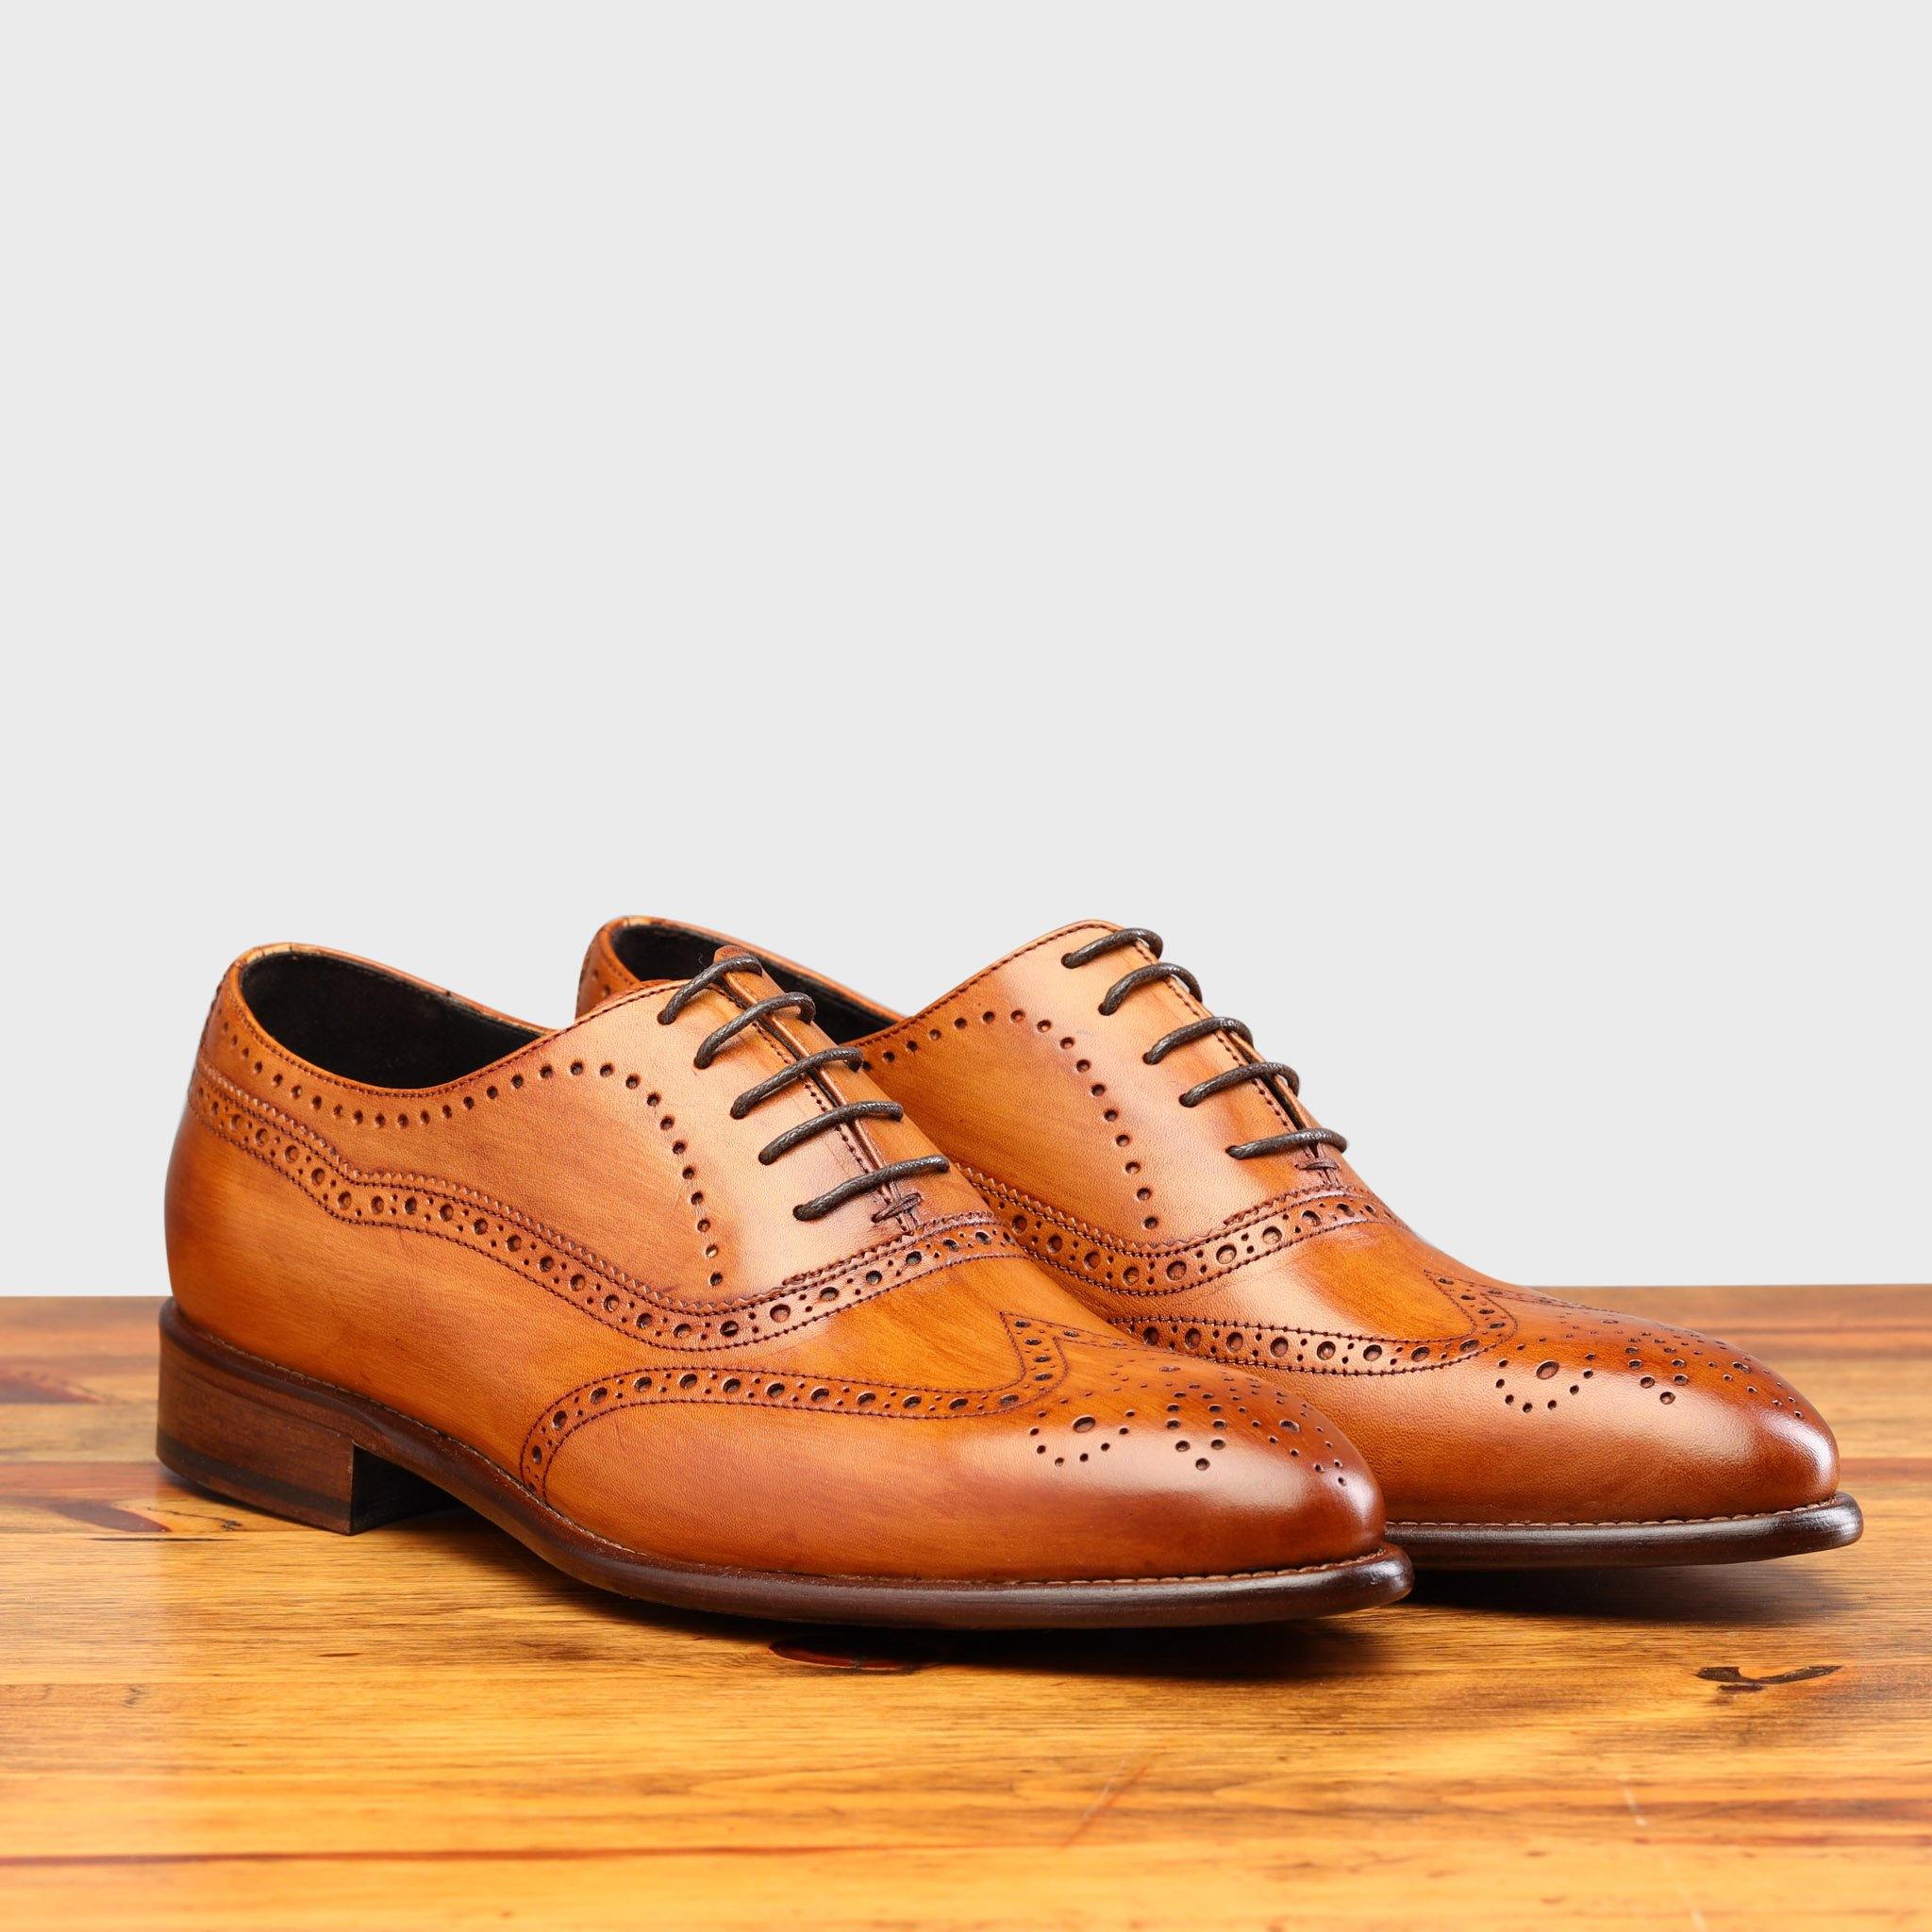 Pair of H742 Calzoleria Toscana Dark Caramel Balmoral Lace-up on top of a wooden table